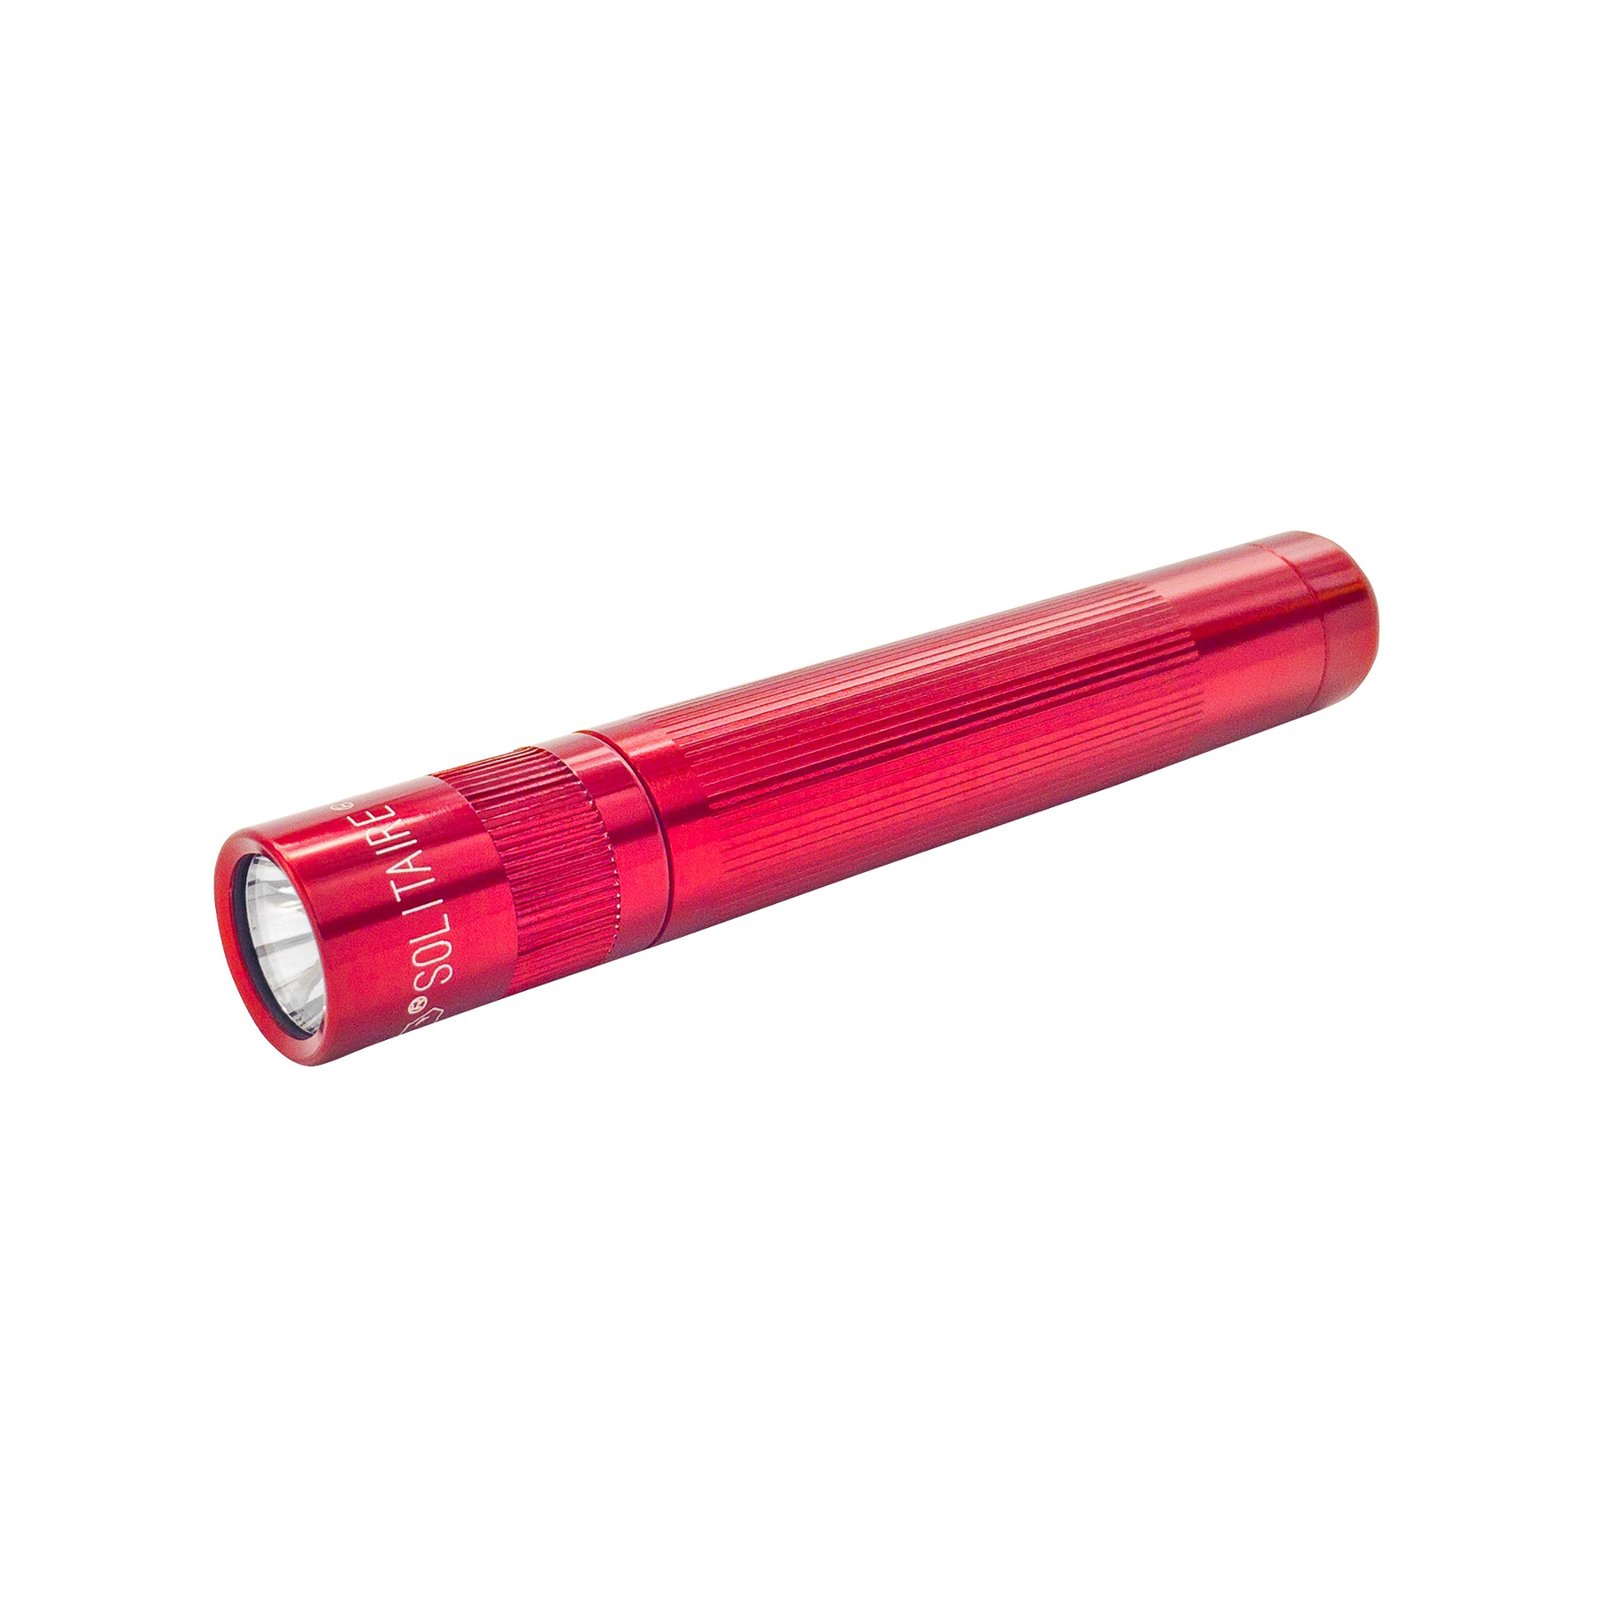 Maglite Xenon-lommelykt Solitaire 1-cellet AAA rød